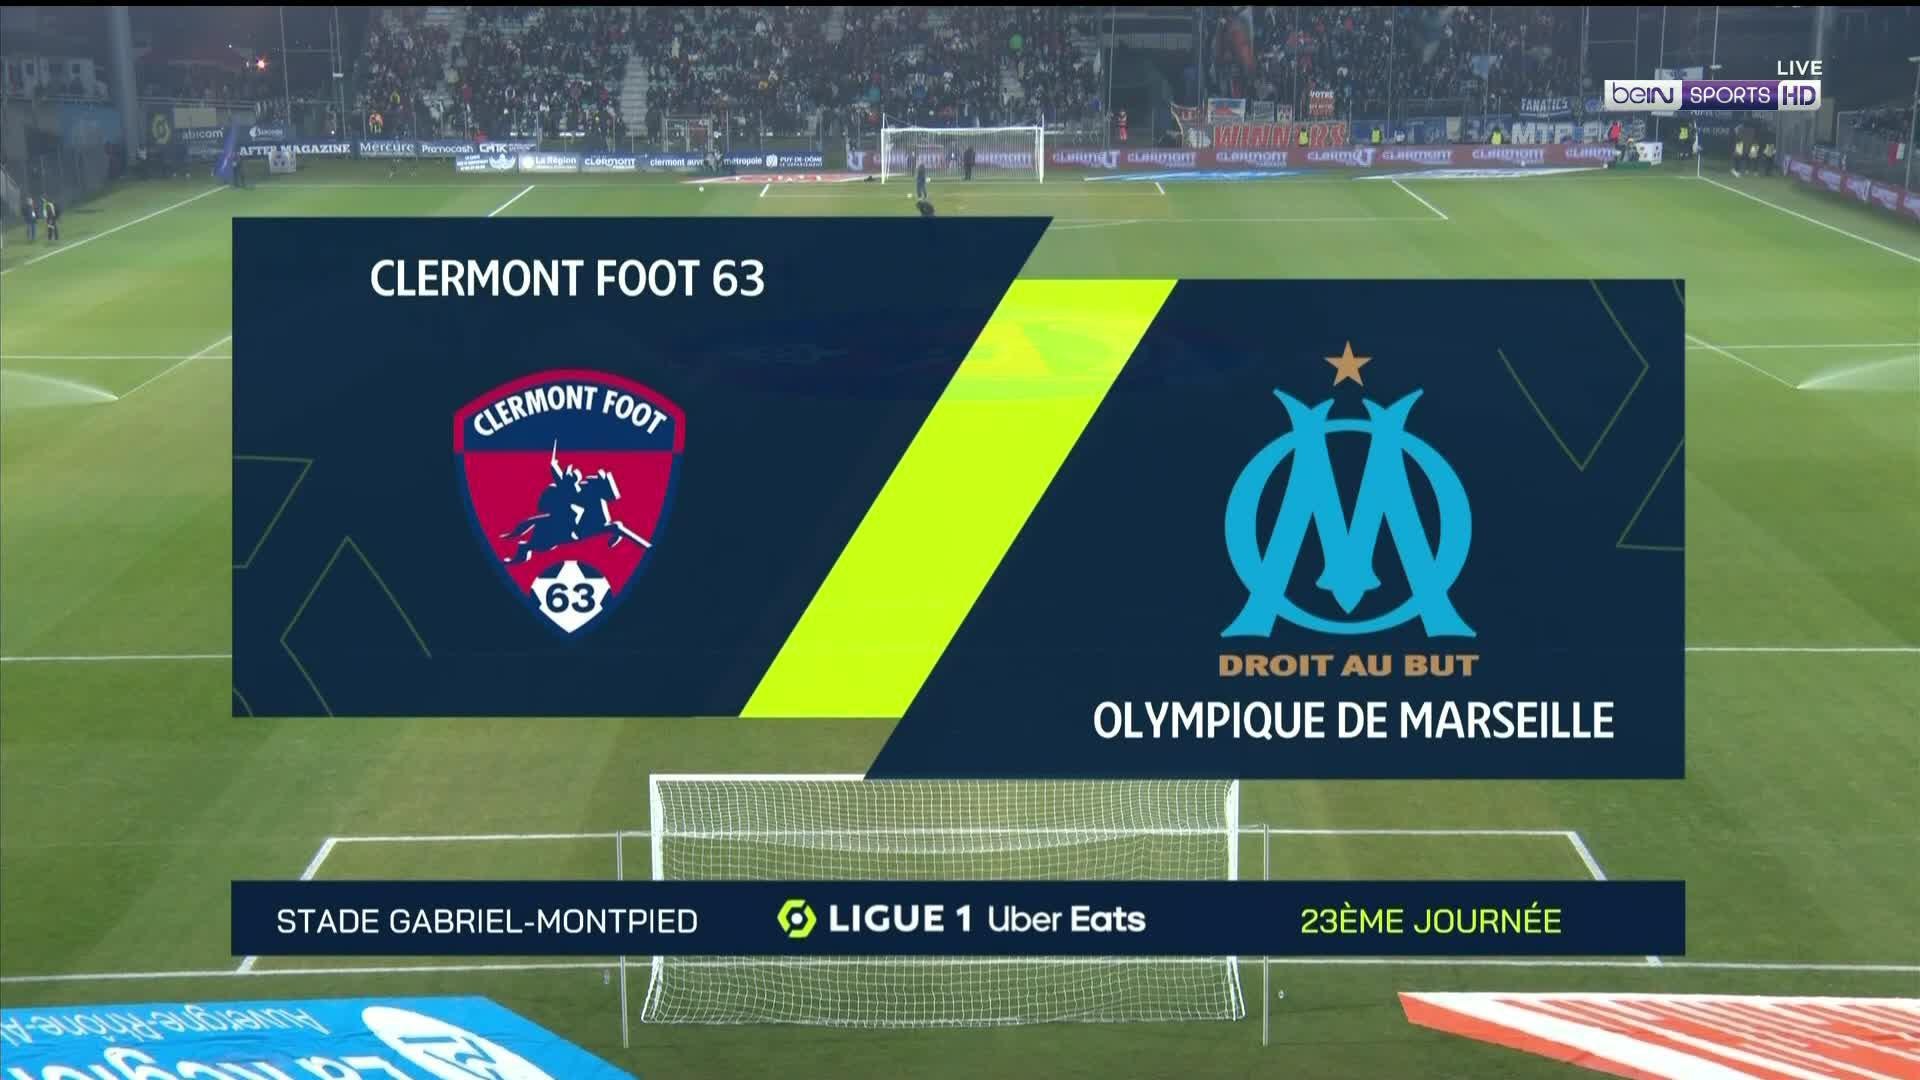 HL - Clermont Foot - Marseille - Ligue 1 - video Dailymotion